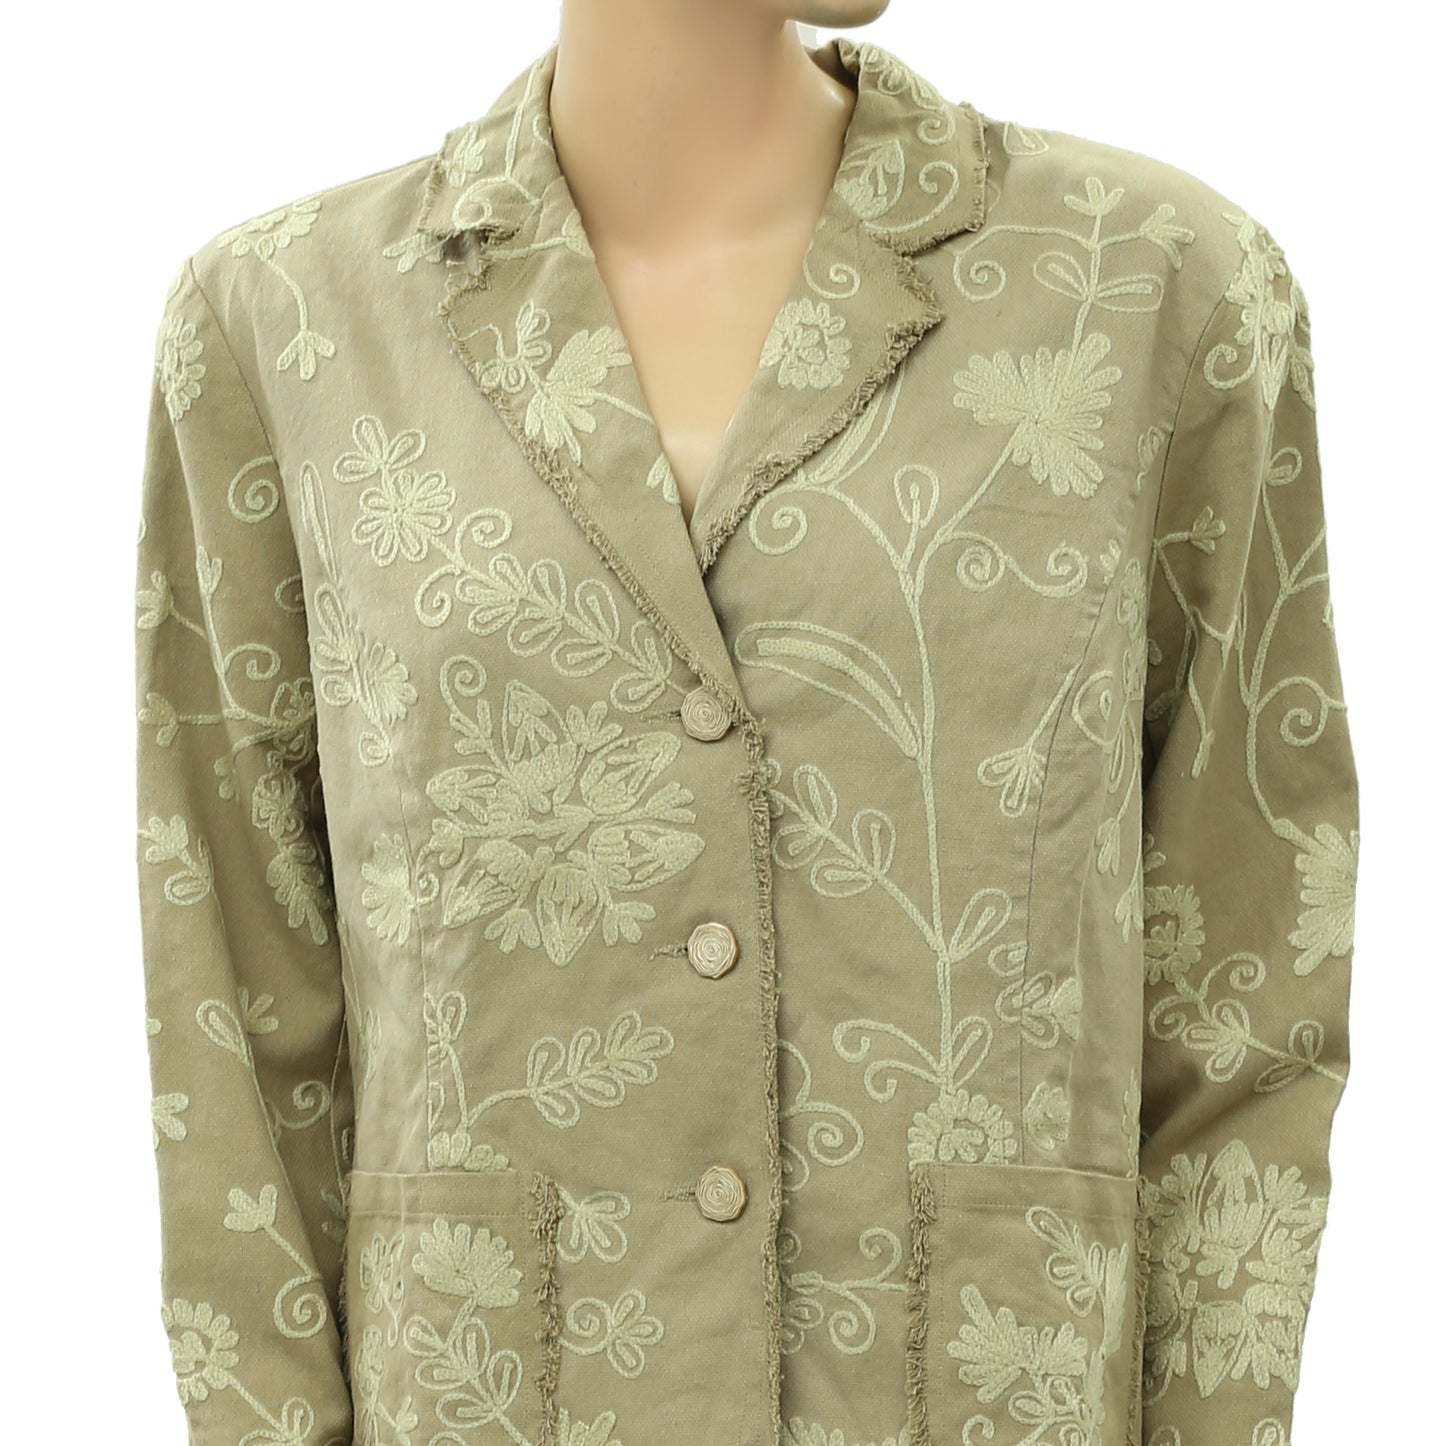 Coldwater Creek Floral Embroidered Tan Jacket Top M